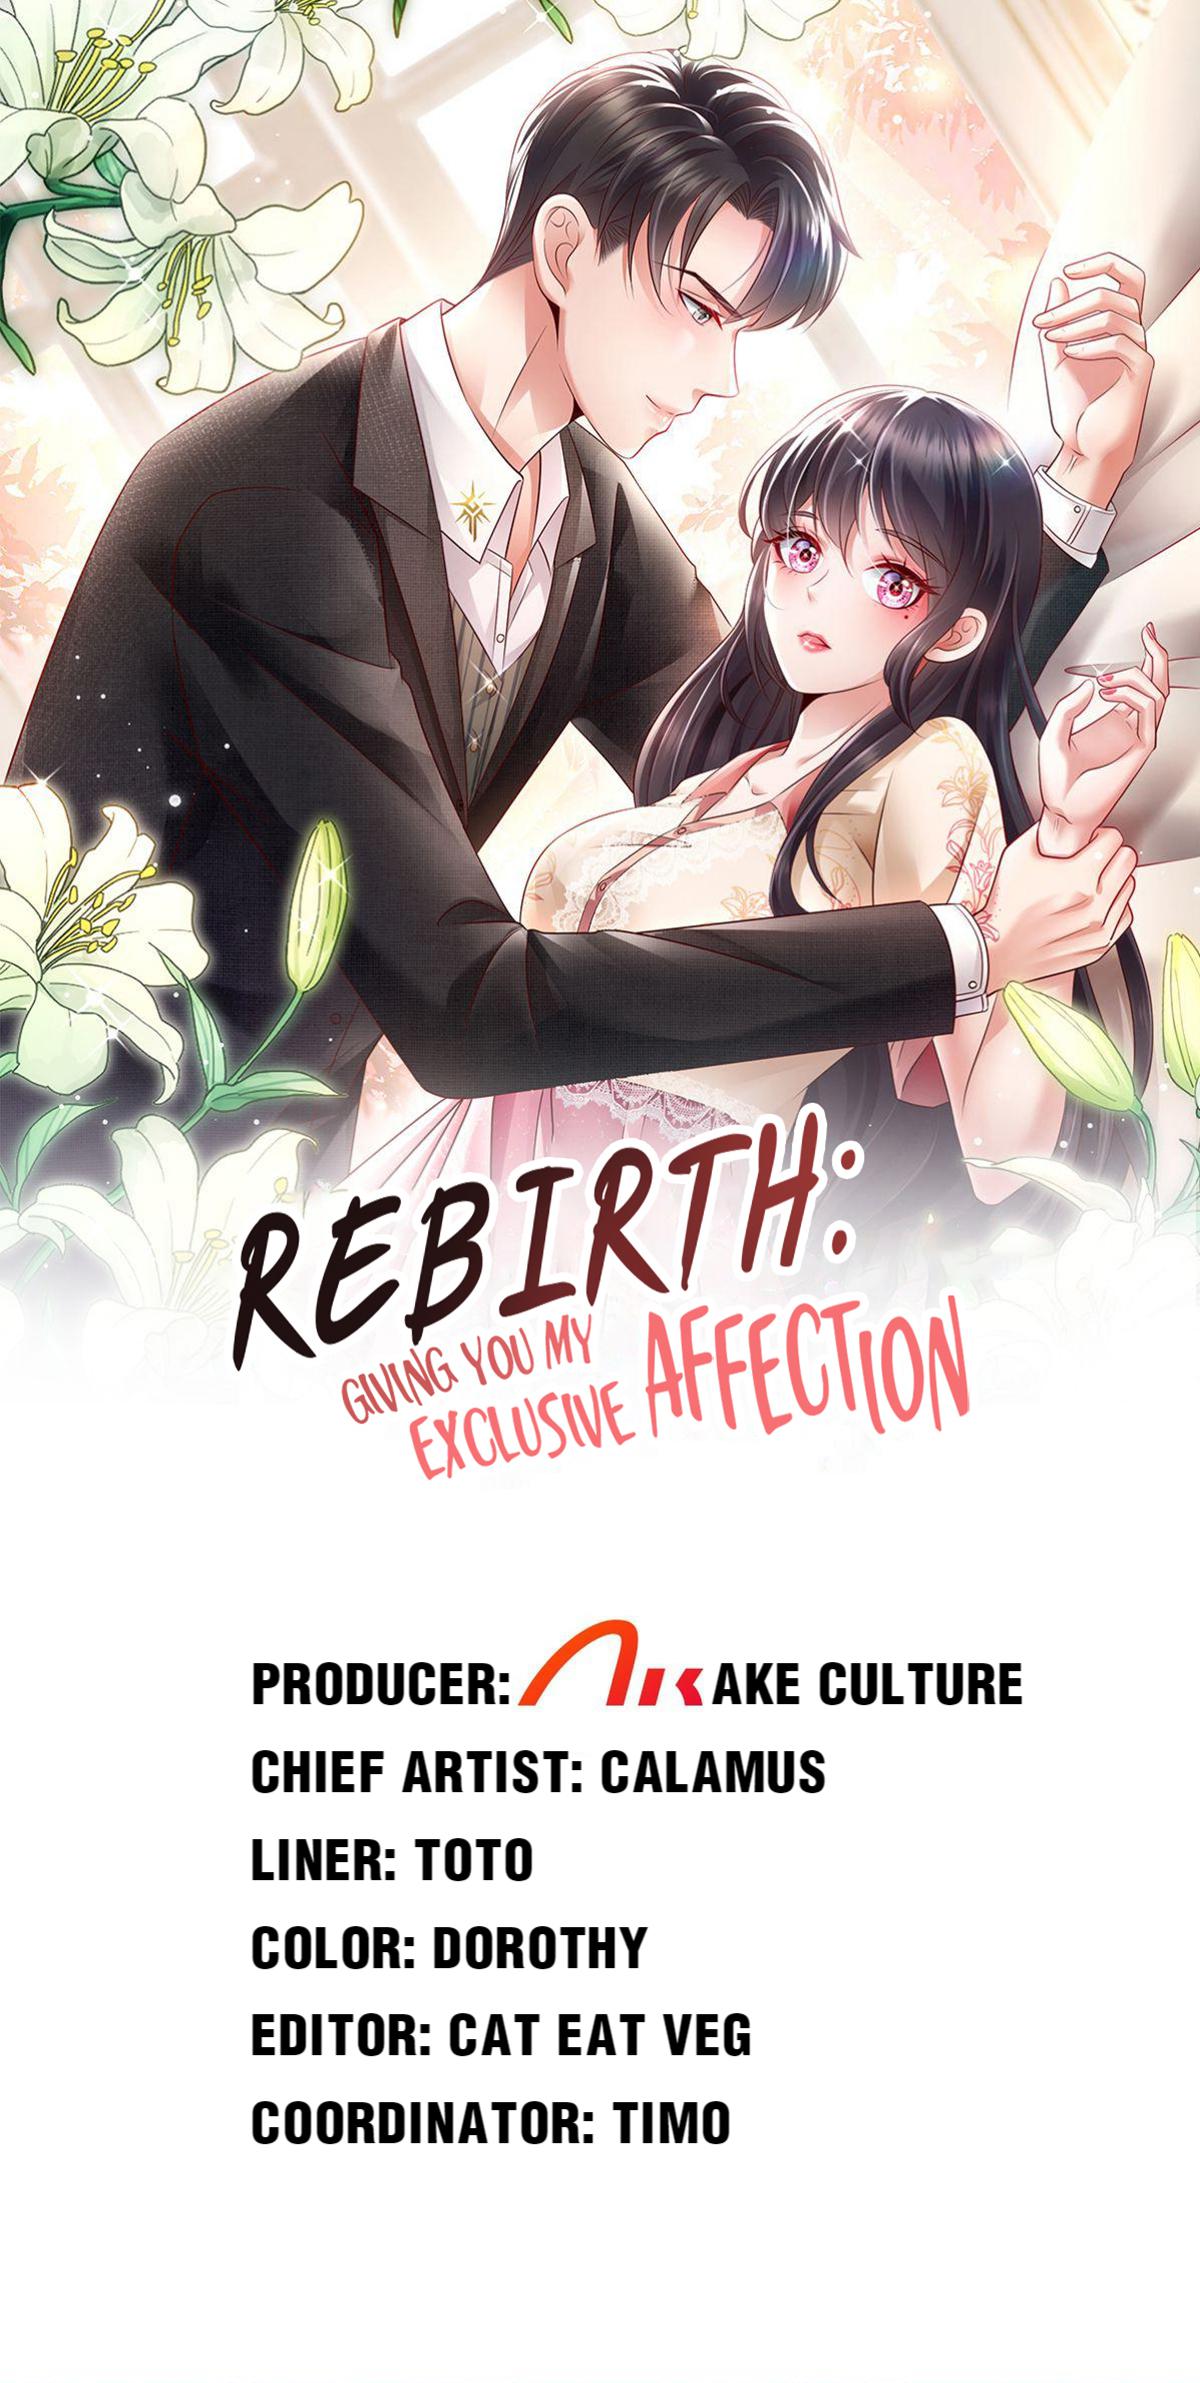 Rebirth: Giving You My Exclusive Affection 66 So You Know Each Other